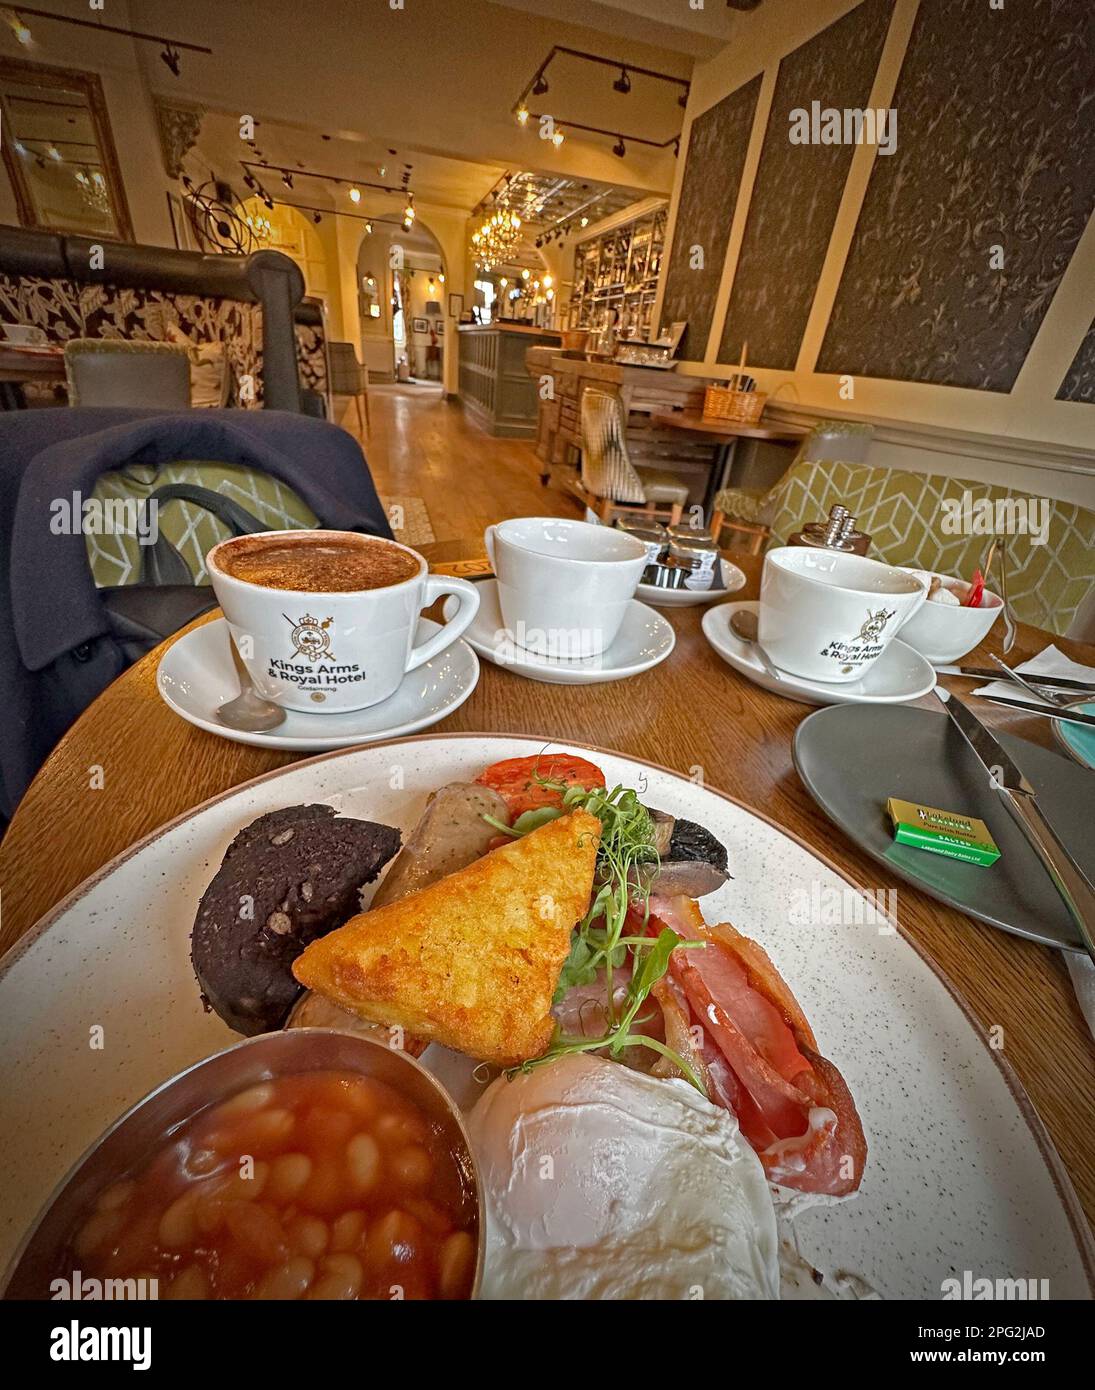 Cooked, full , English, breakfast, sausage, egg, black pudding, eggs, bacon, hash brown, tomato, coffee, at Kings Arms & Royal, Godalming,Surrey,UK Stock Photo